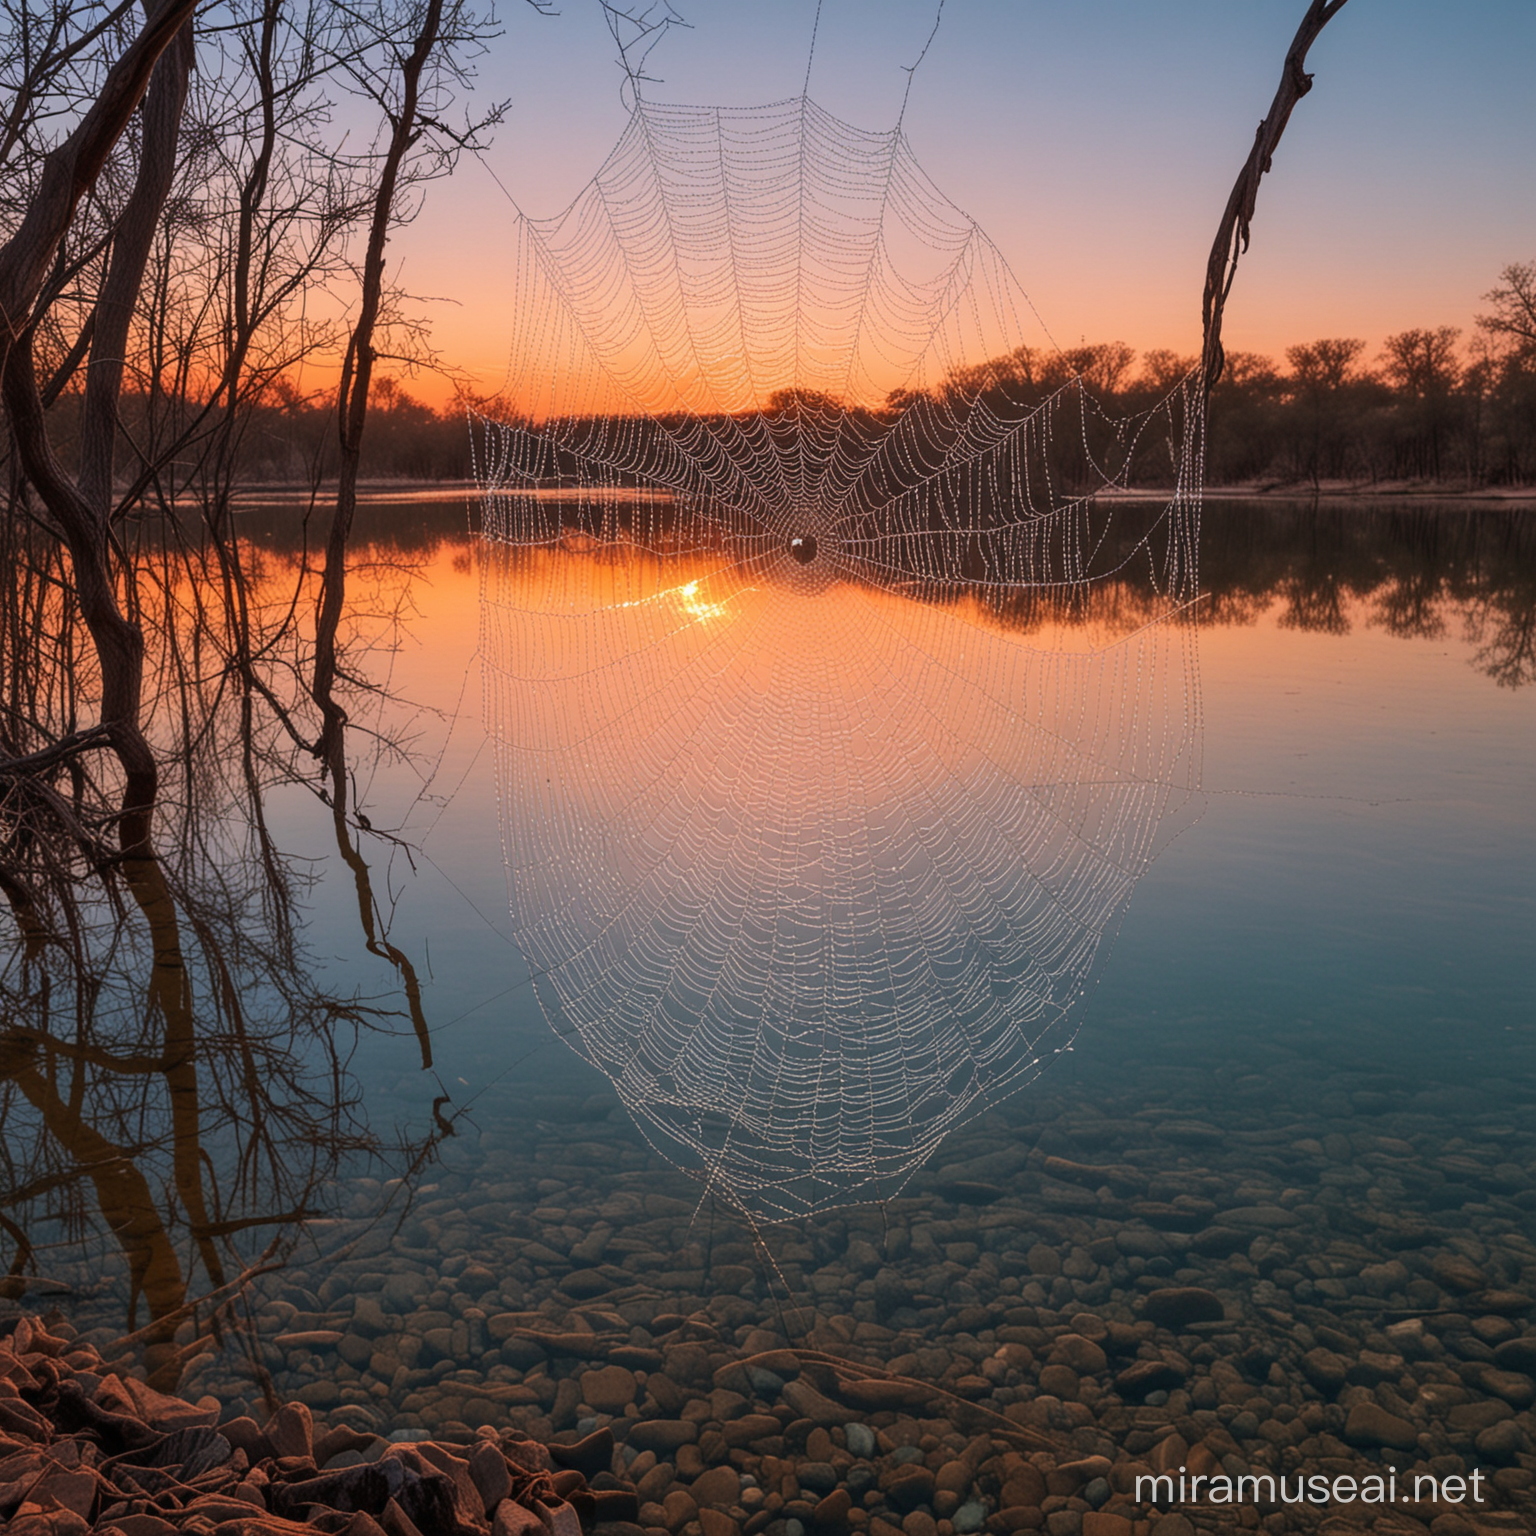 Sunset Lake Landscape with Spider Web and Brain